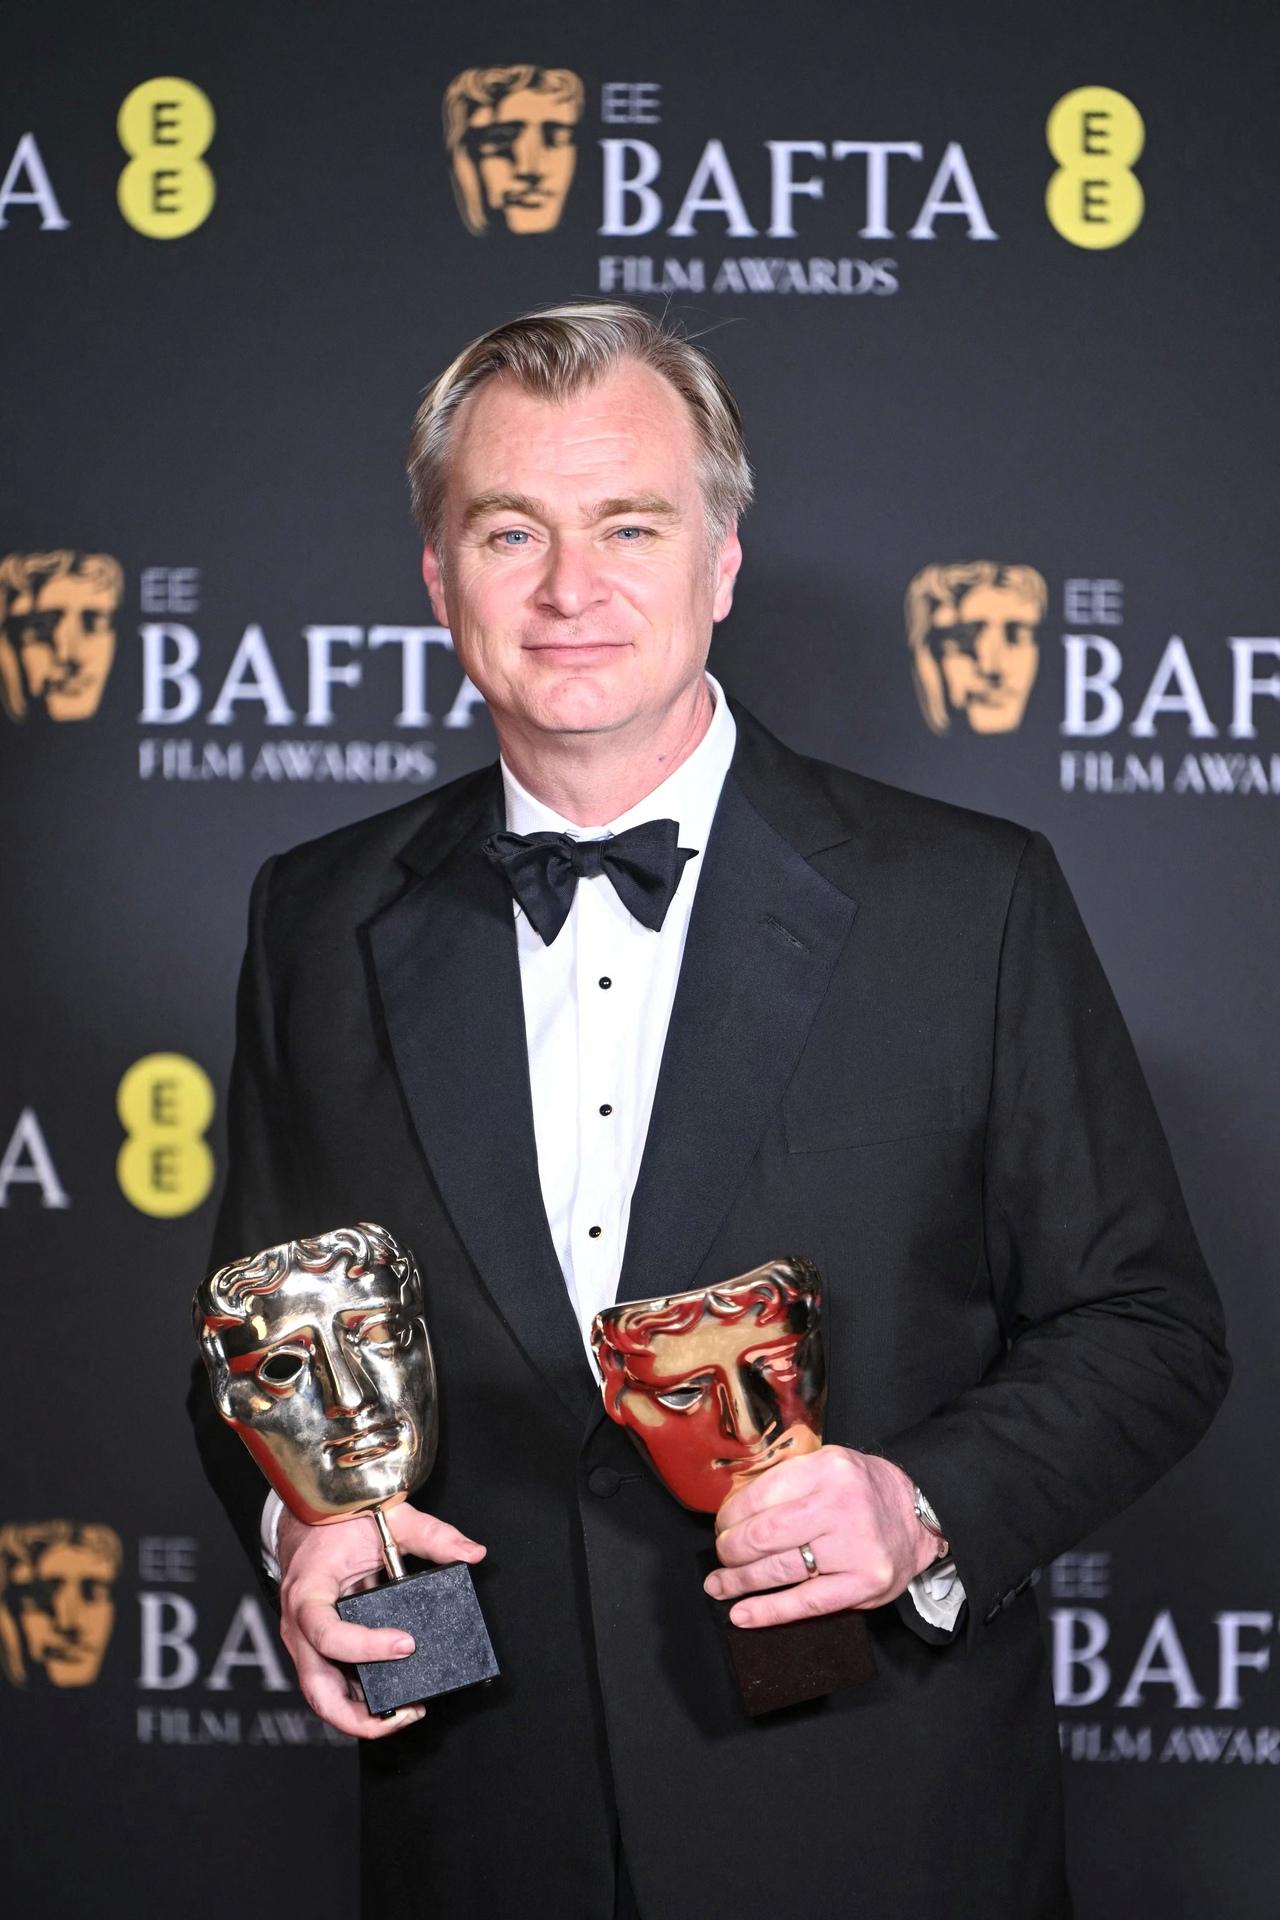 Christopher Nolan won his first BAFTA for his much-acclaimed film 'Oppenheimer'